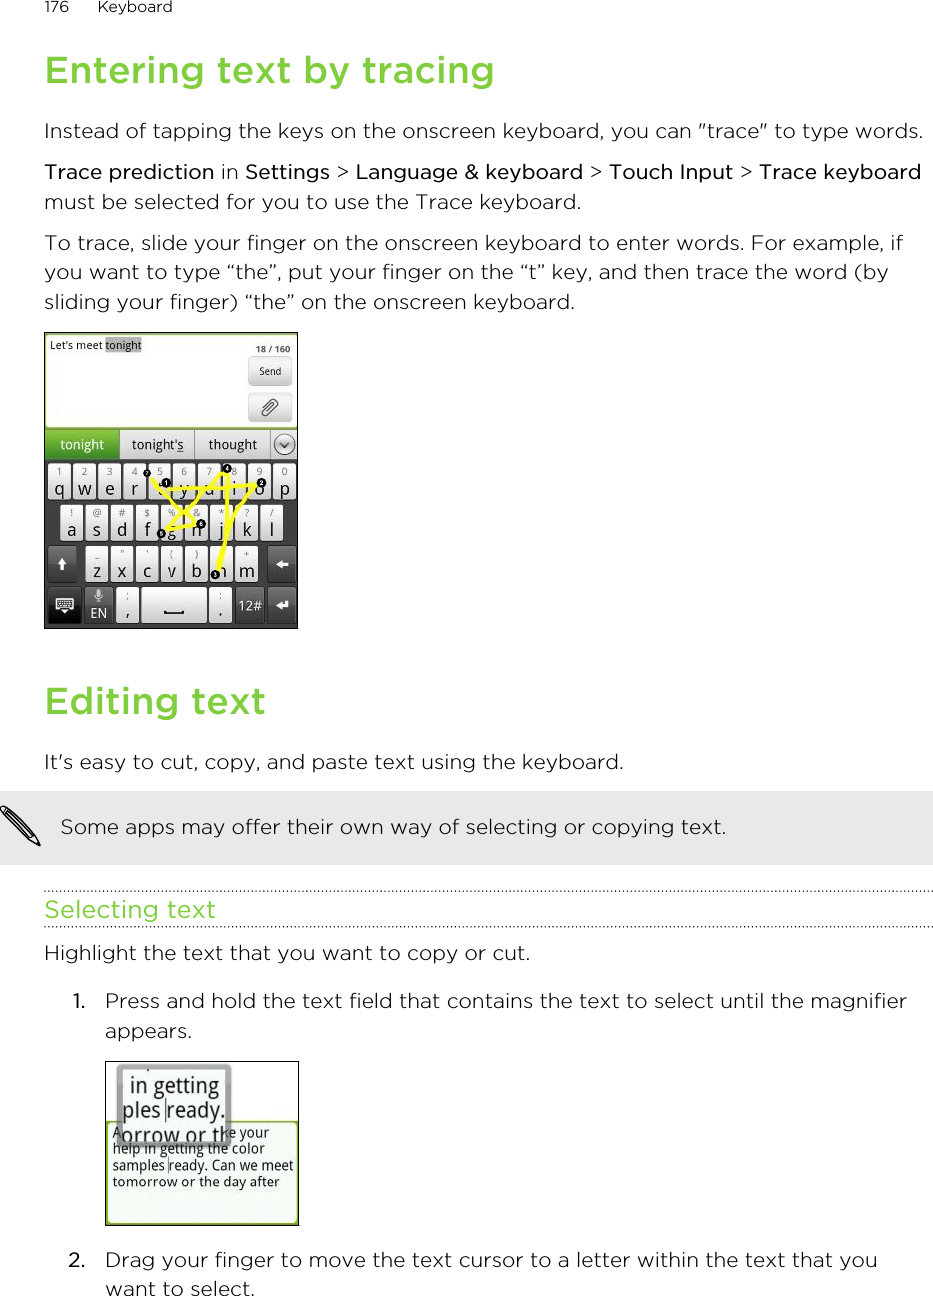 Entering text by tracingInstead of tapping the keys on the onscreen keyboard, you can &quot;trace&quot; to type words.Trace prediction in Settings &gt; Language &amp; keyboard &gt; Touch Input &gt; Trace keyboardmust be selected for you to use the Trace keyboard.To trace, slide your finger on the onscreen keyboard to enter words. For example, ifyou want to type “the”, put your finger on the “t” key, and then trace the word (bysliding your finger) “the” on the onscreen keyboard.Editing textIt&apos;s easy to cut, copy, and paste text using the keyboard.Some apps may offer their own way of selecting or copying text.Selecting textHighlight the text that you want to copy or cut.1. Press and hold the text field that contains the text to select until the magnifierappears. 2. Drag your finger to move the text cursor to a letter within the text that youwant to select.176 Keyboard